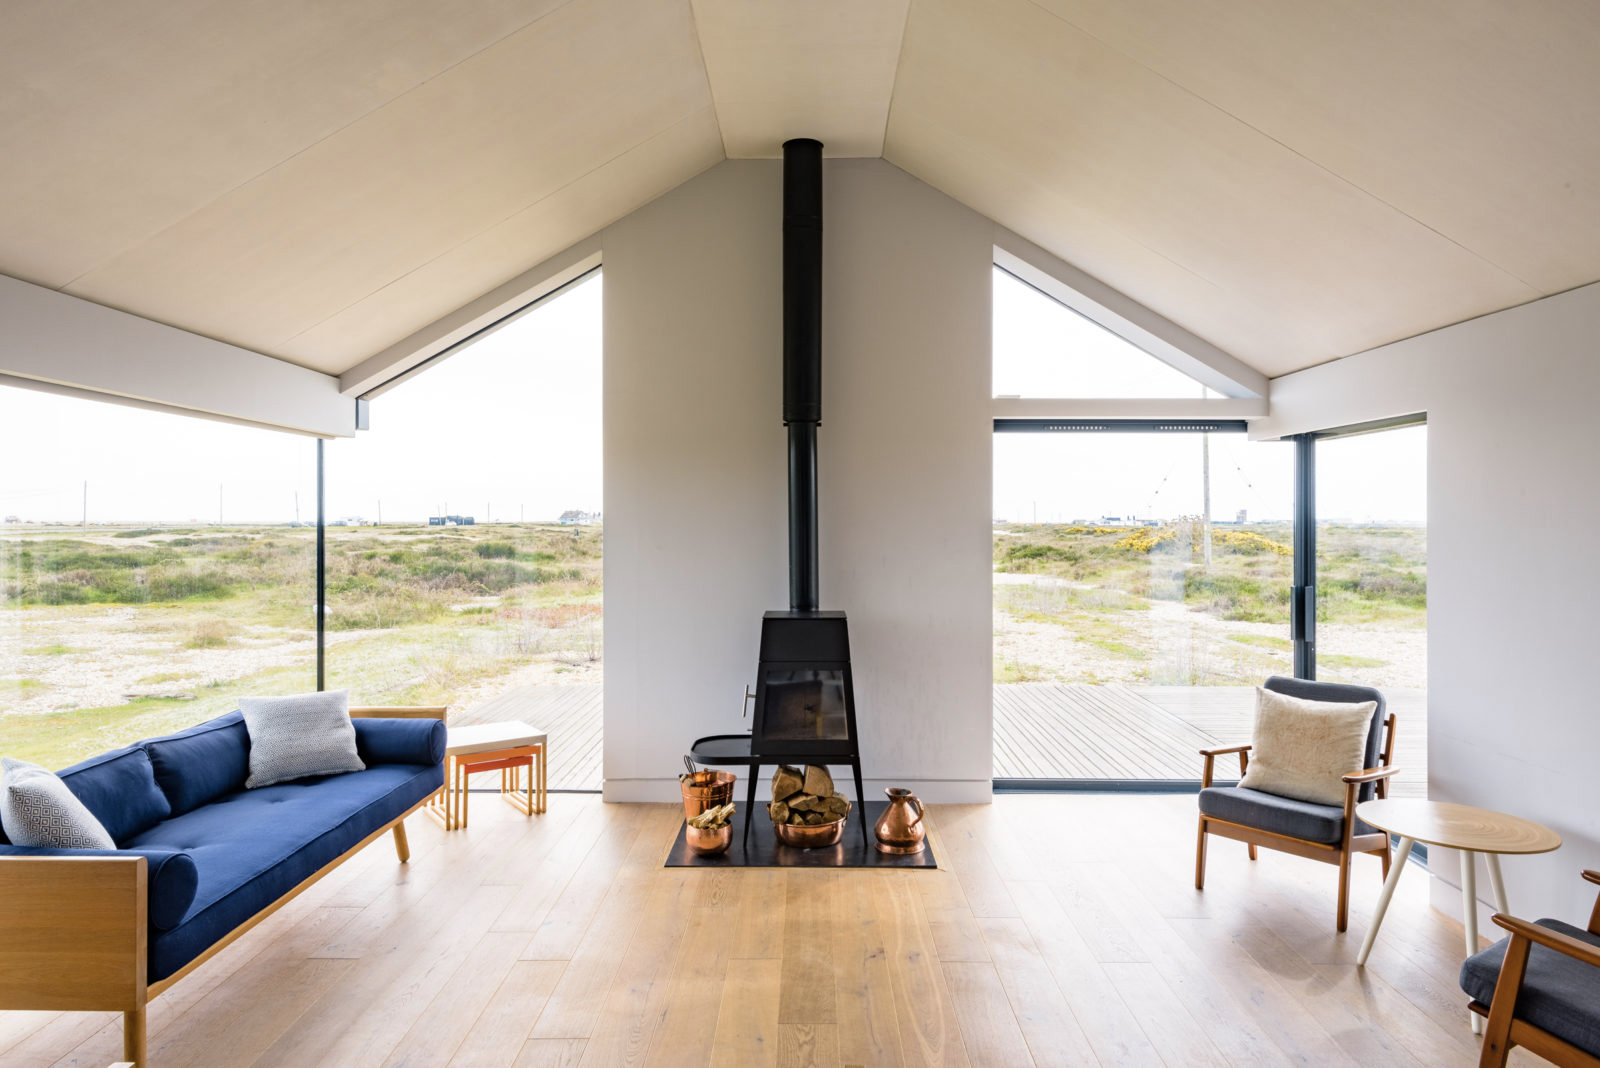 Dungeness’s award-winning Pobble House is for sale